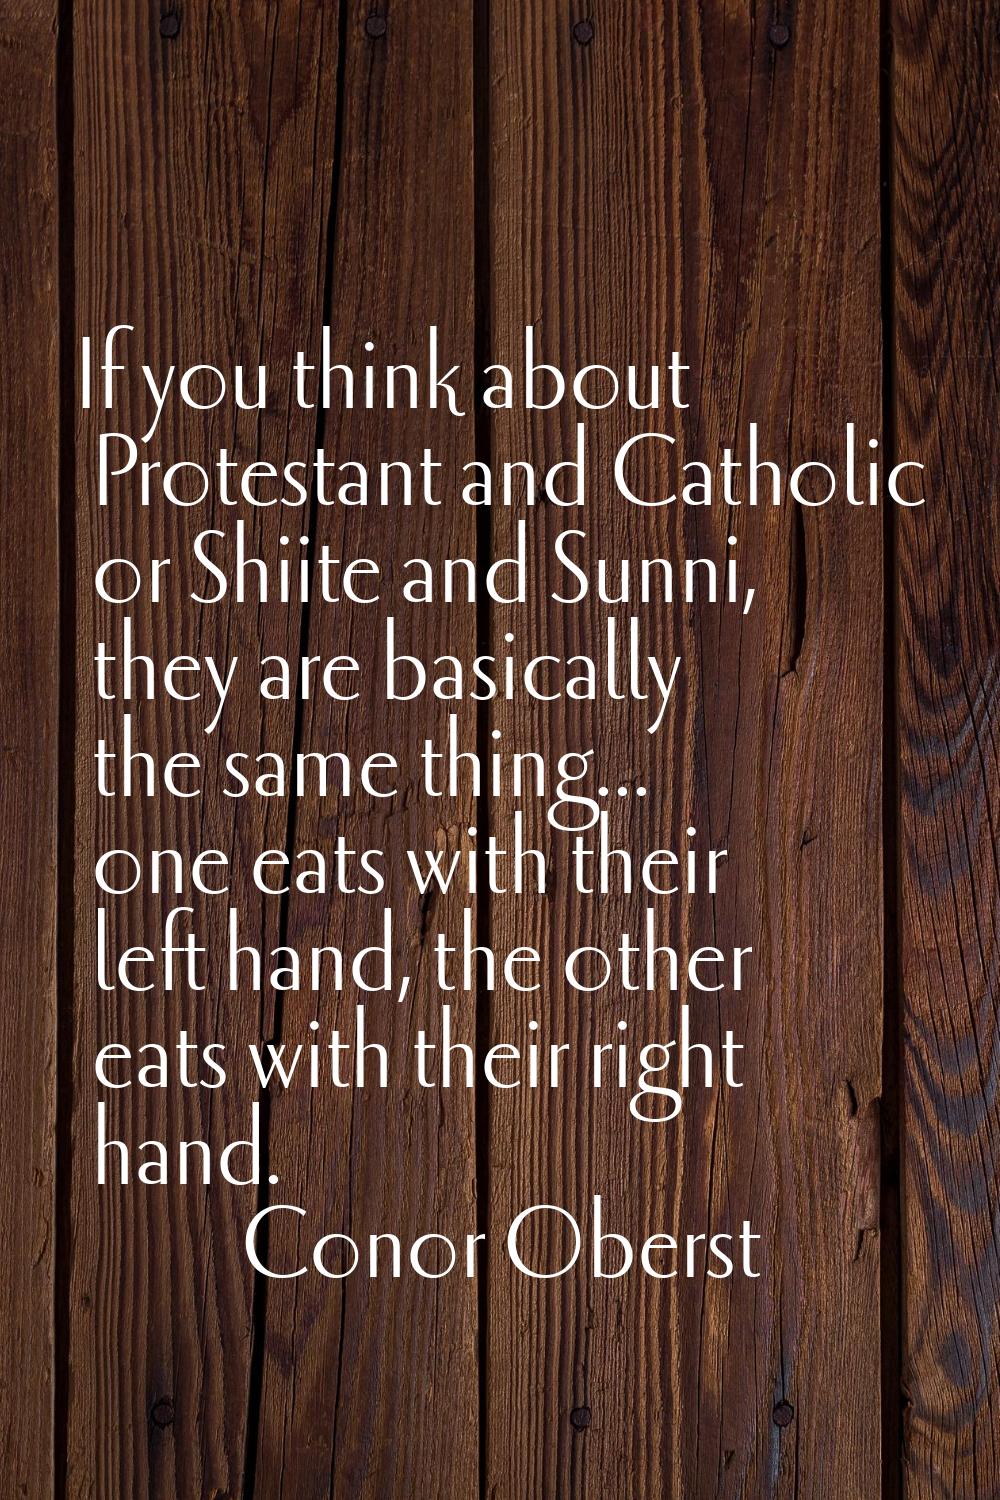 If you think about Protestant and Catholic or Shiite and Sunni, they are basically the same thing..